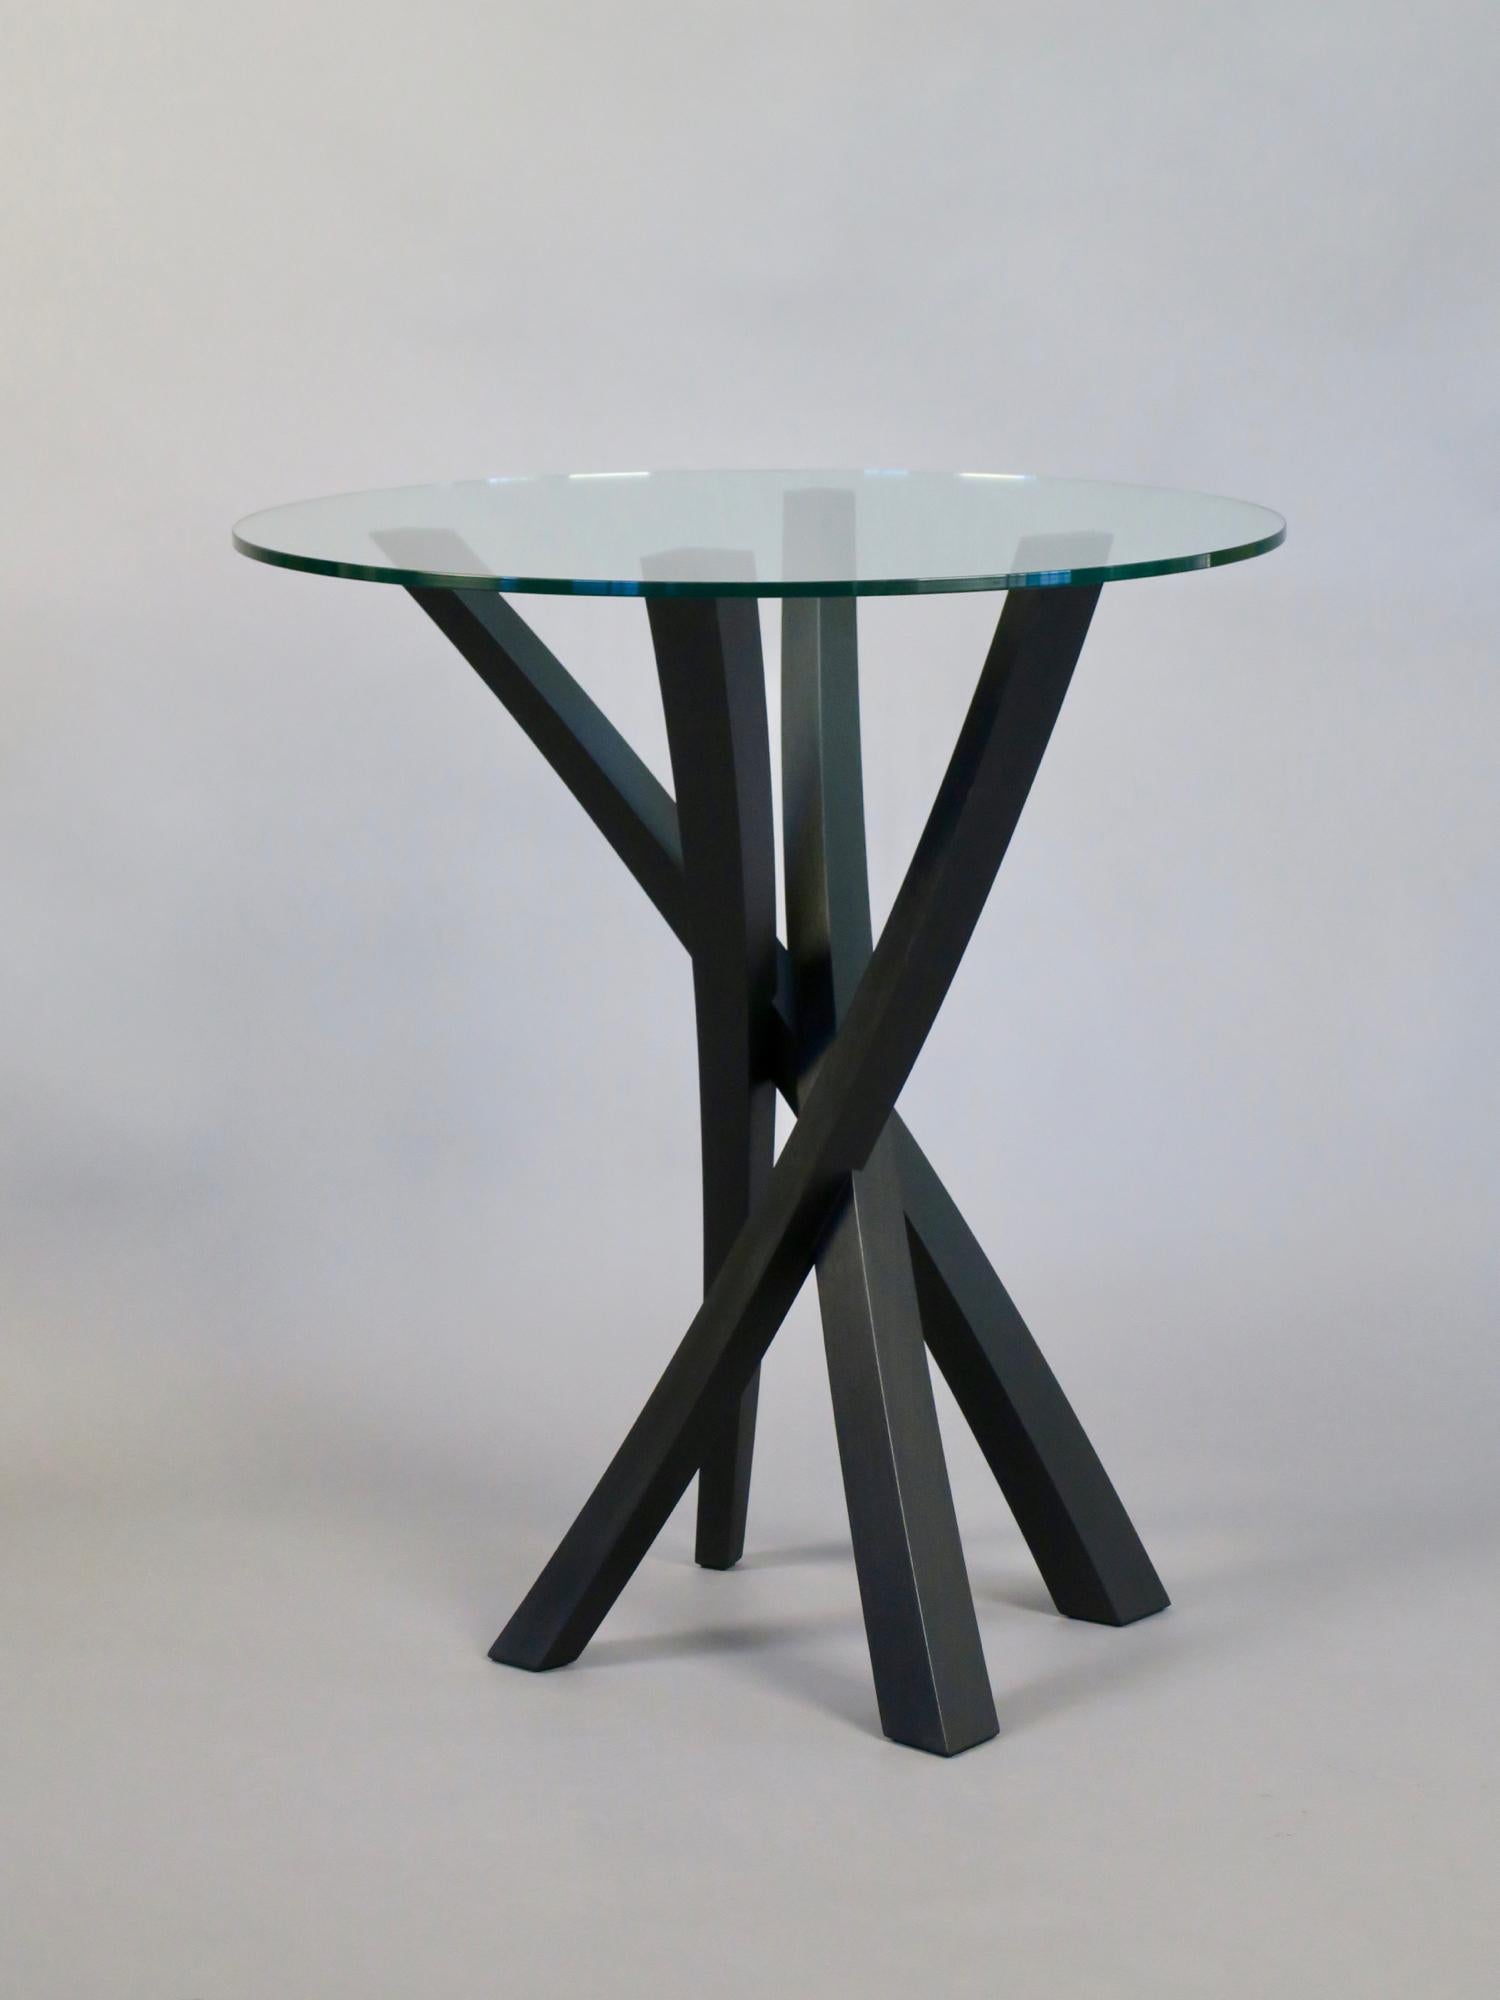 Ebonized Sculptural Walnut and Glass Side Table by Thomas Throop/ Black Creek Designs For Sale